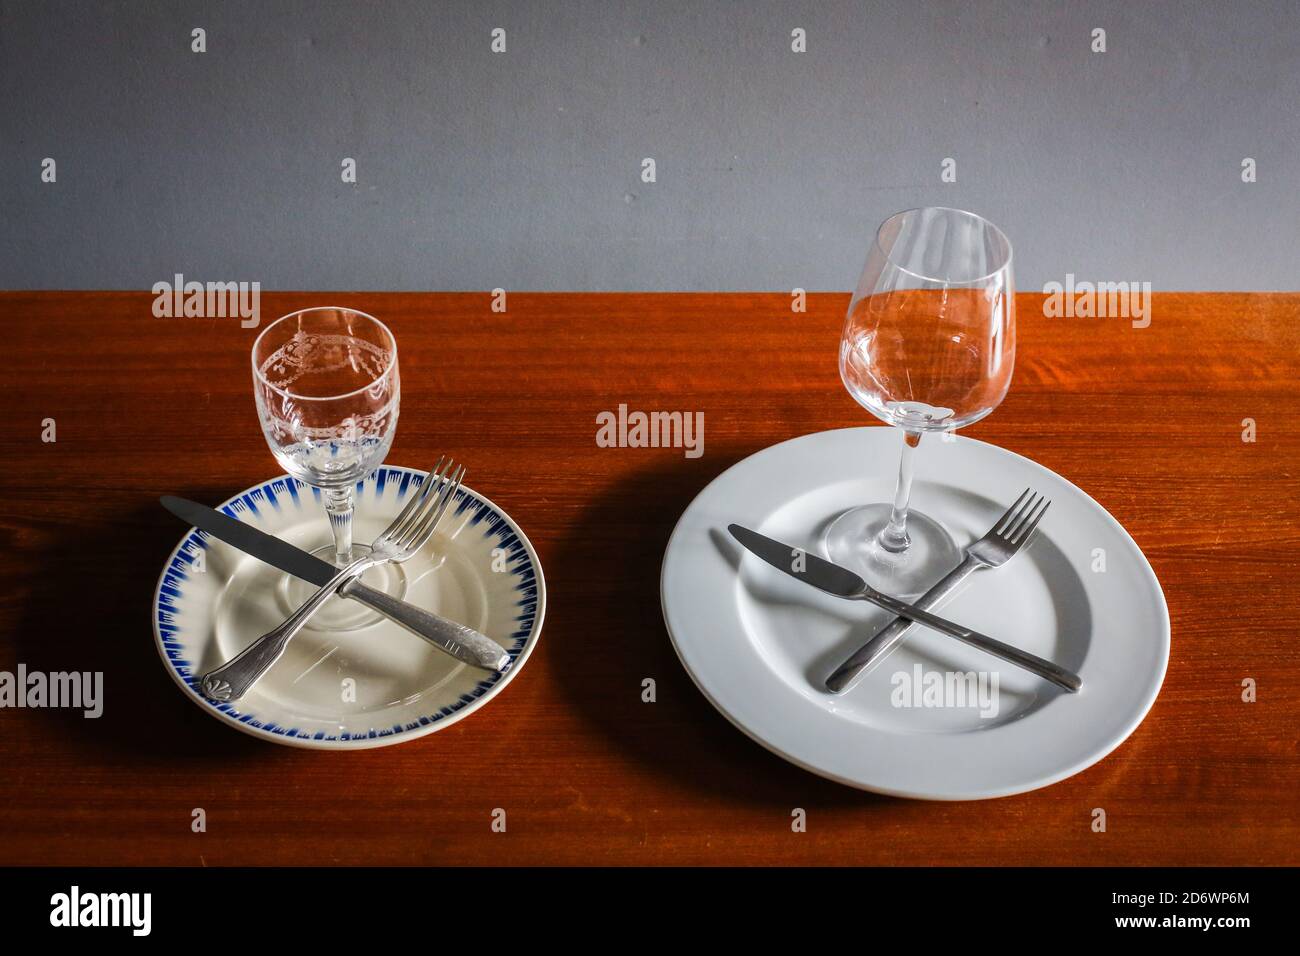 Illustration on the difference in the quantity of food served for a meal in the 1950s and today, France. Stock Photo